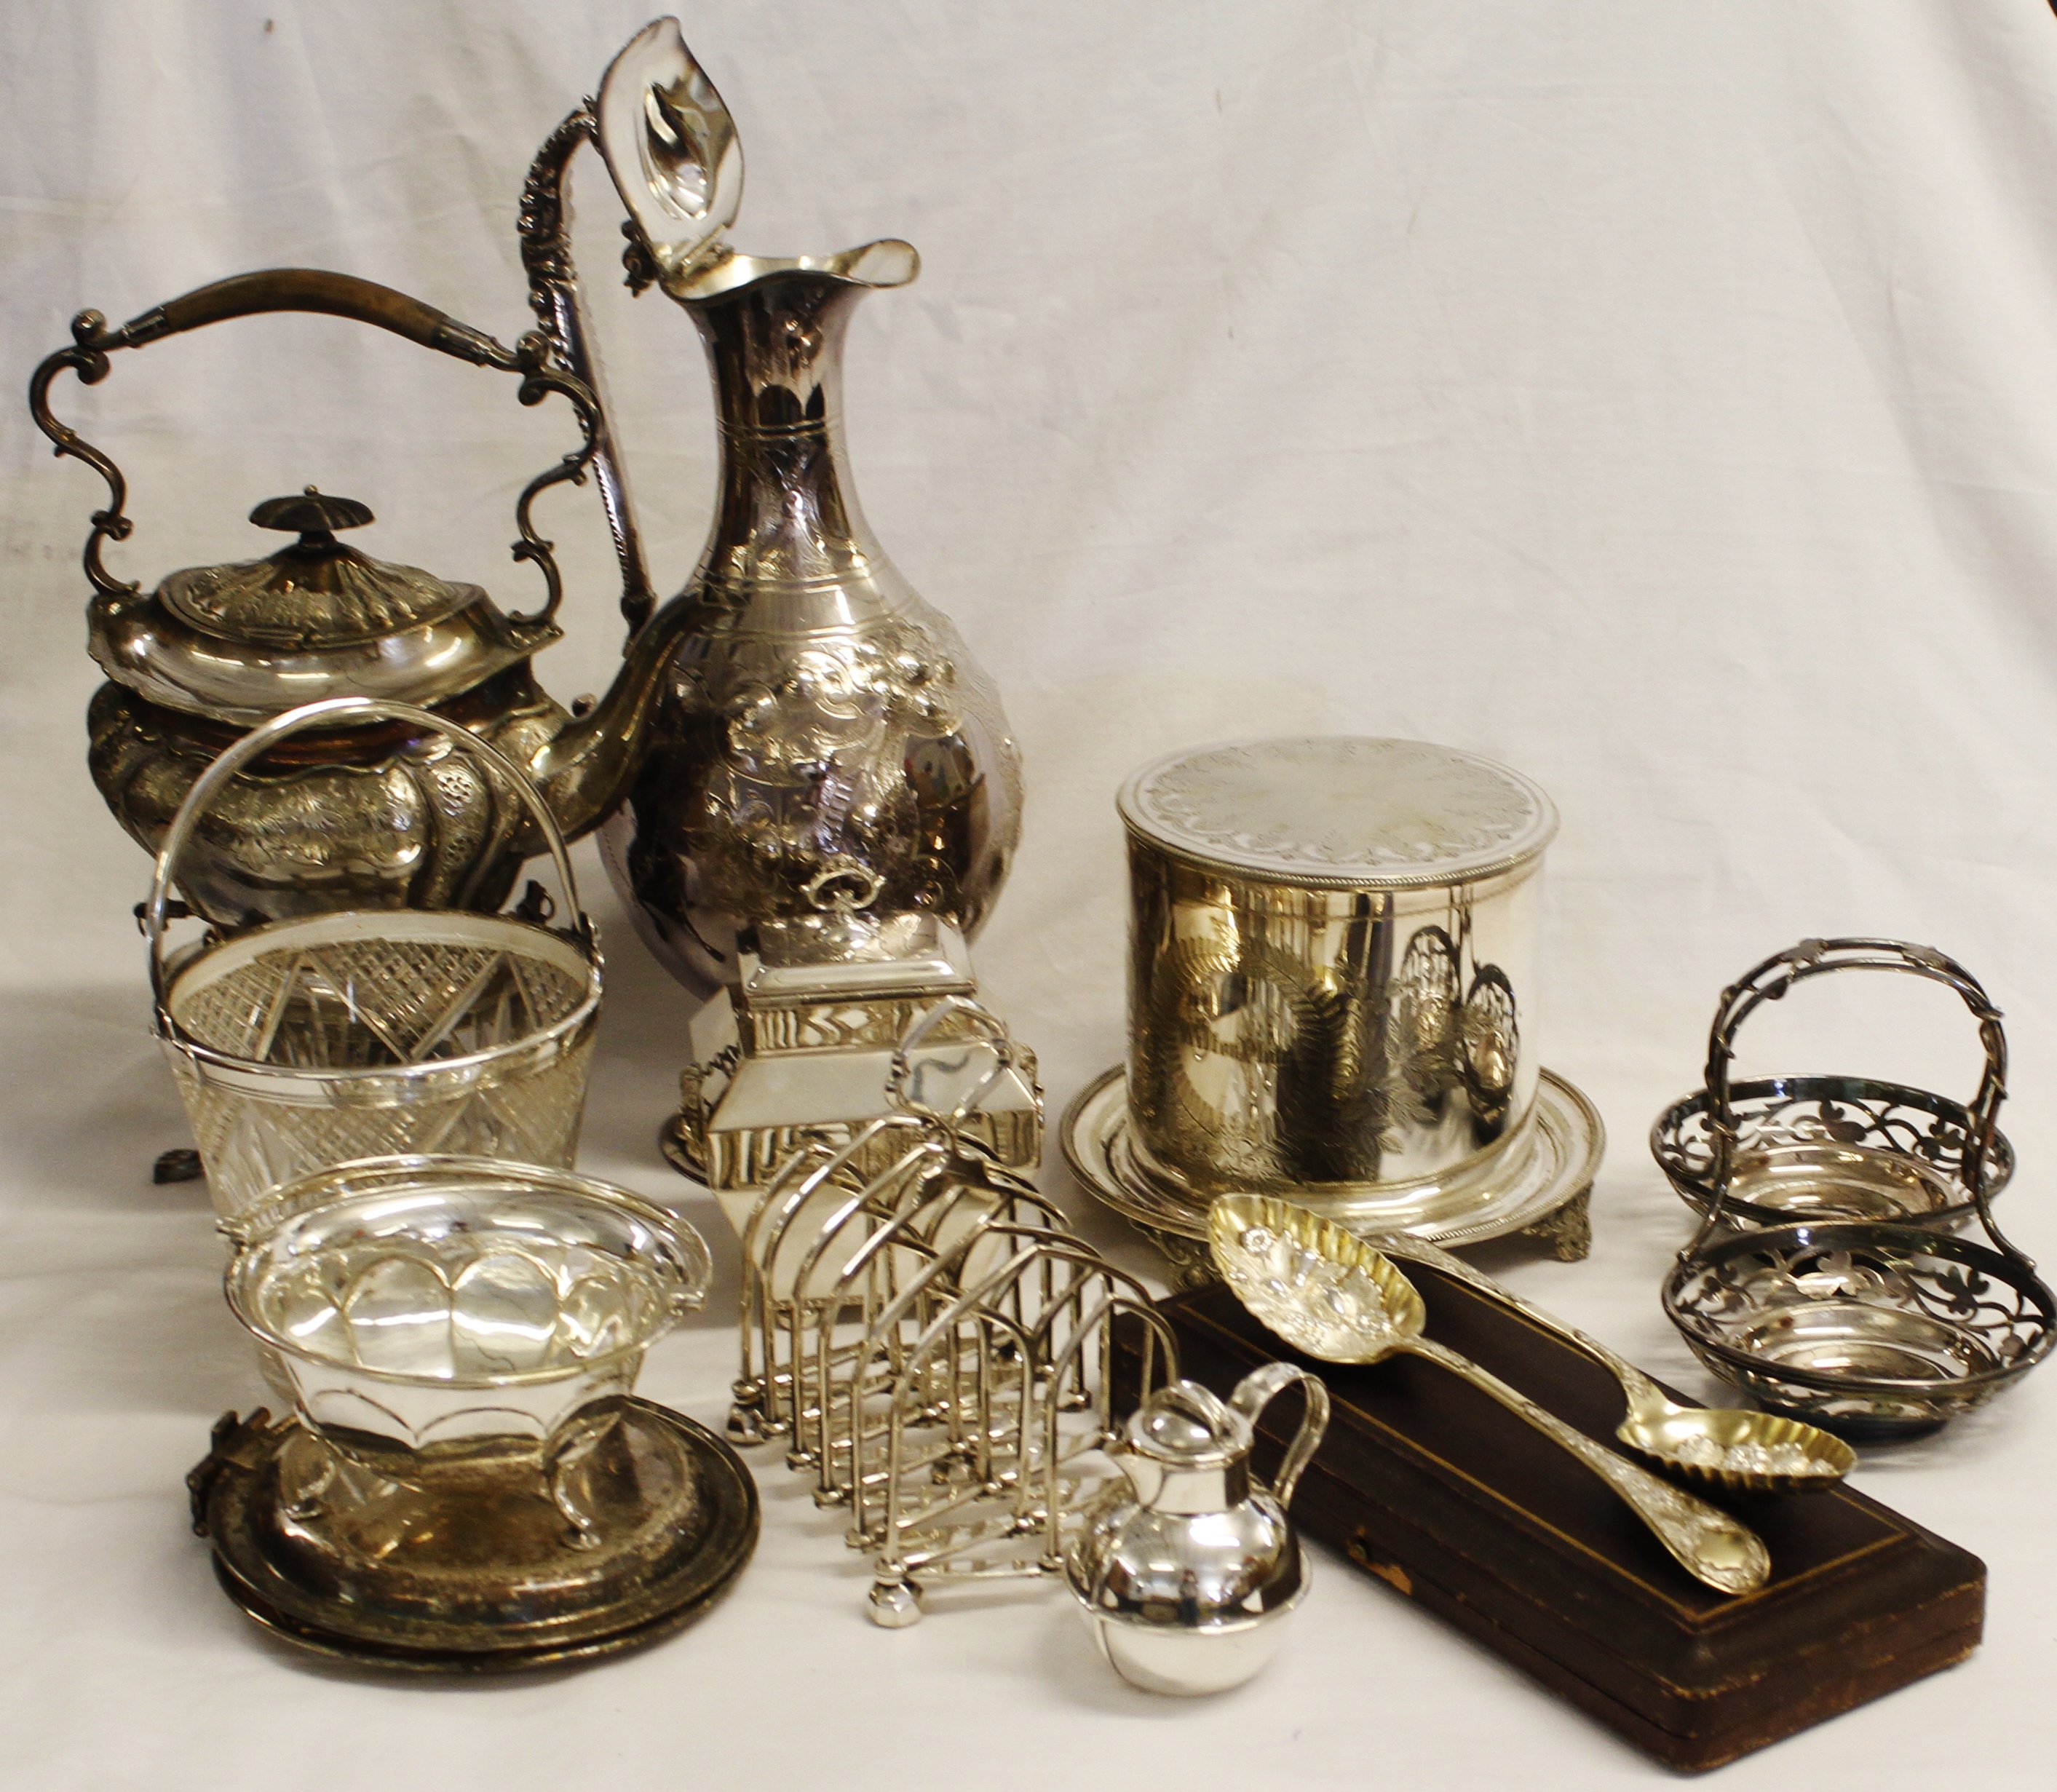 Mixed Lot of electroplated table wares: lidded ewer, tea kettle on stand, ice bucket, biscuit